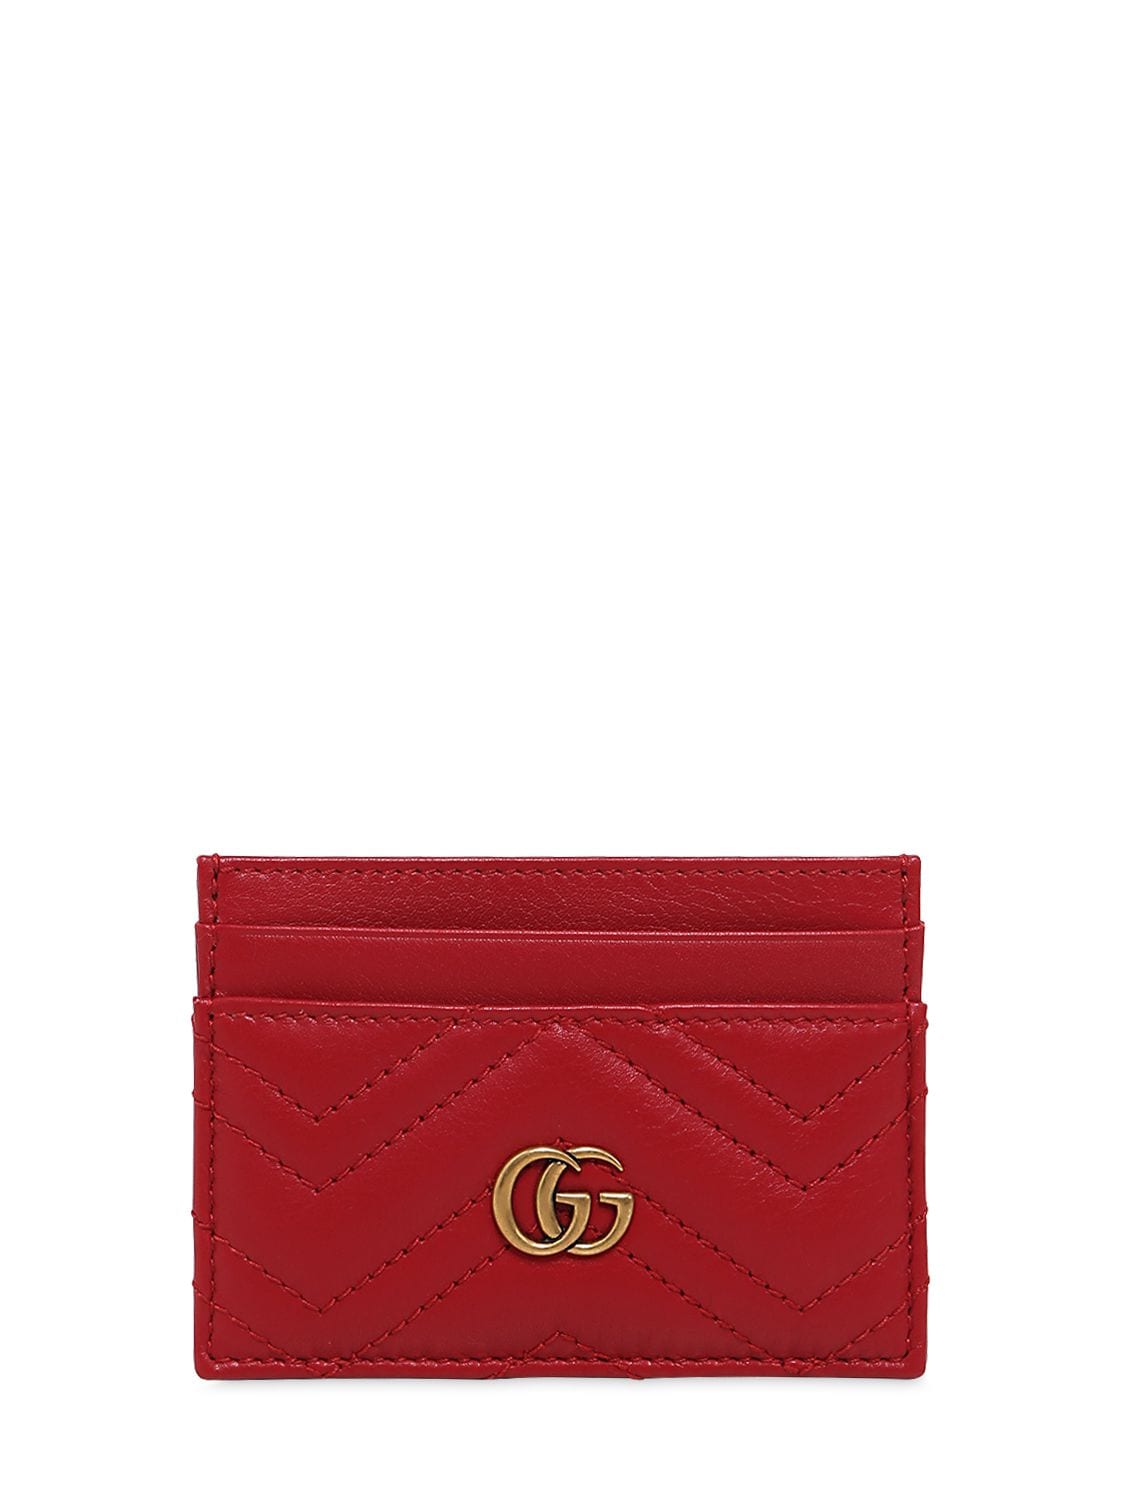 Gg Marmont Quilted Leather Card Holder